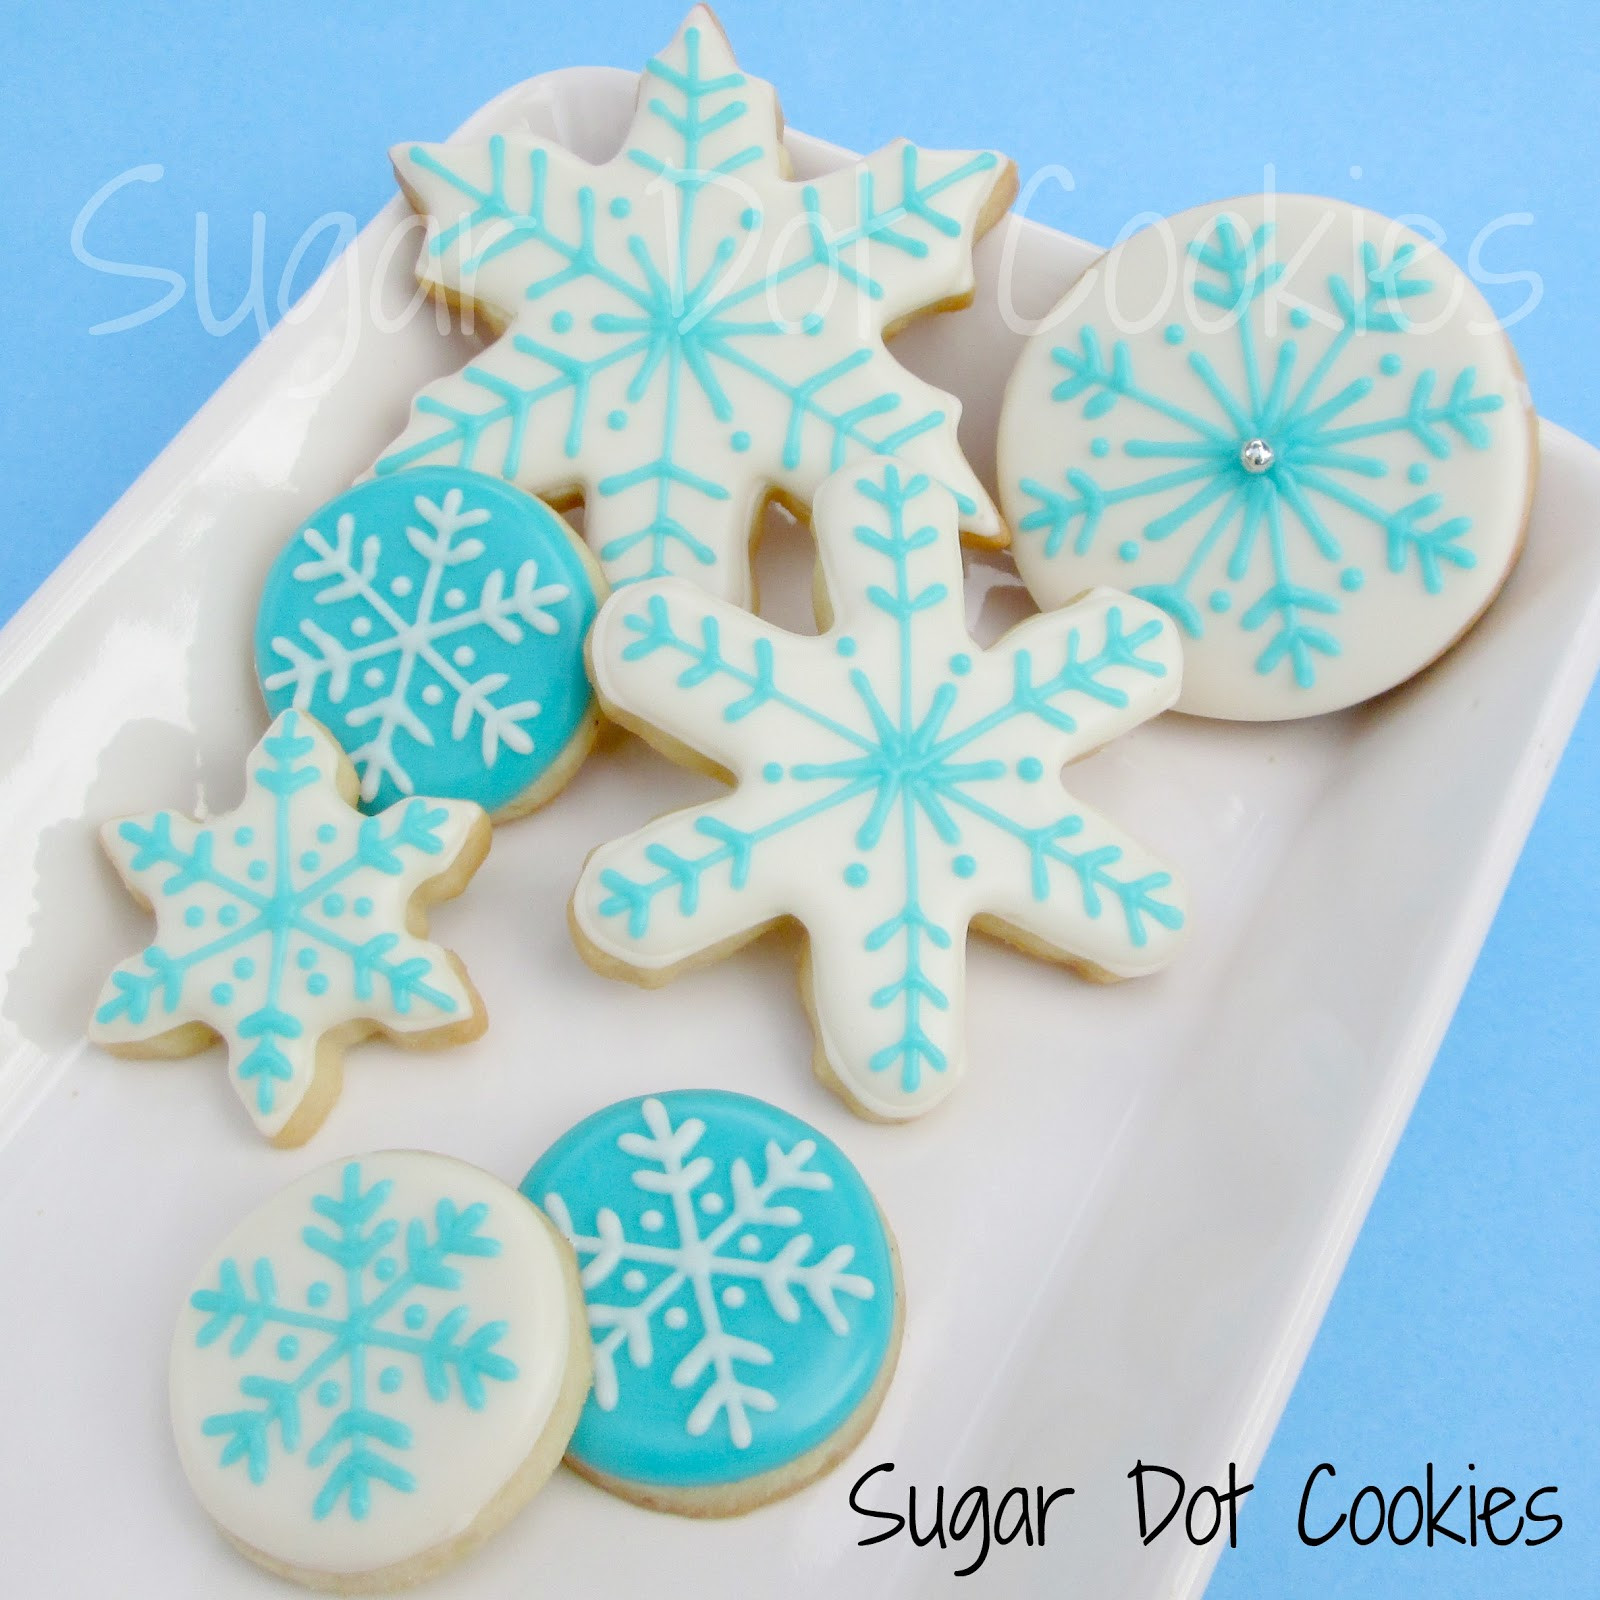 Winter Sugar Cookies
 No frills snowmen I was tempted to add ear muffs but